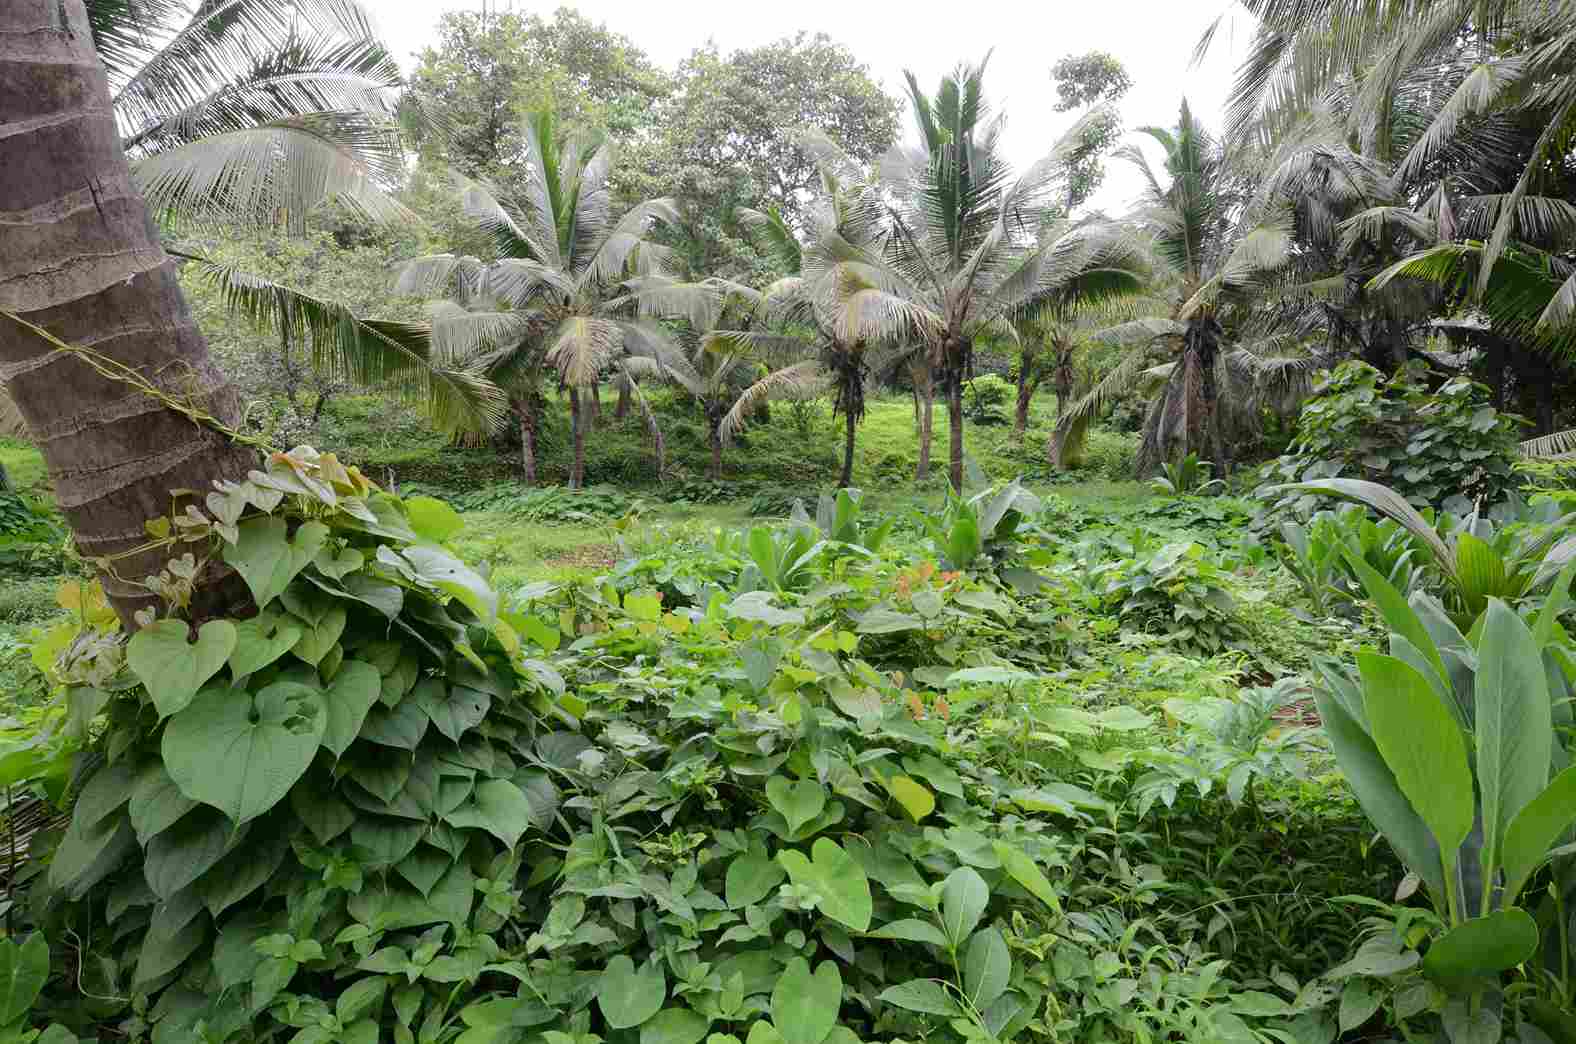 The spice plantations at Maachli include nutmeg, cinnamon, tea, and other plants